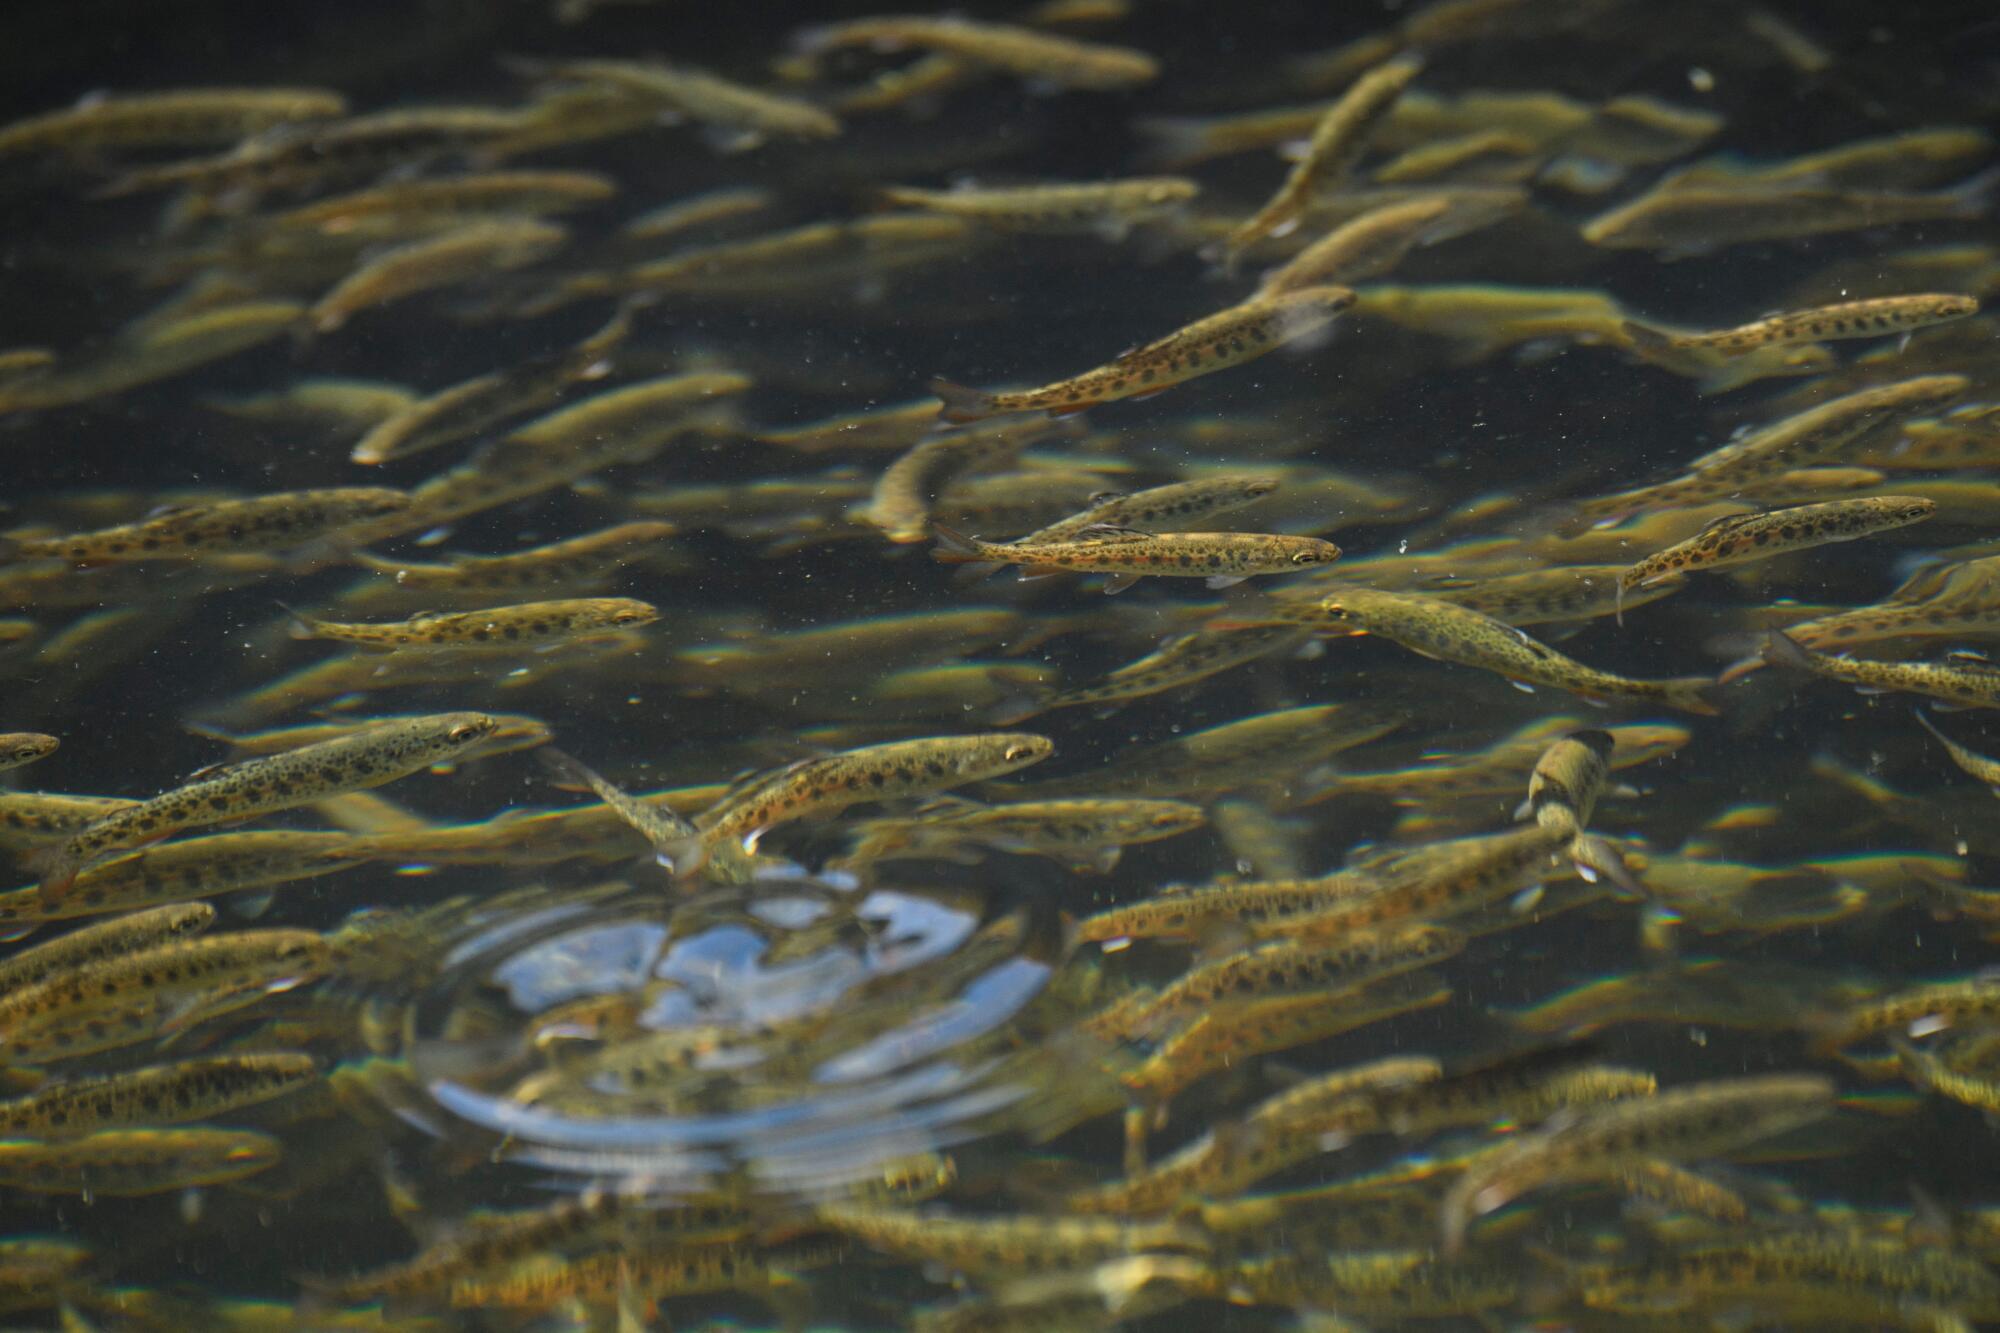 Steelhead trout fingerlings swim in a raceway pond at the California Department of Fish and Wildlife 